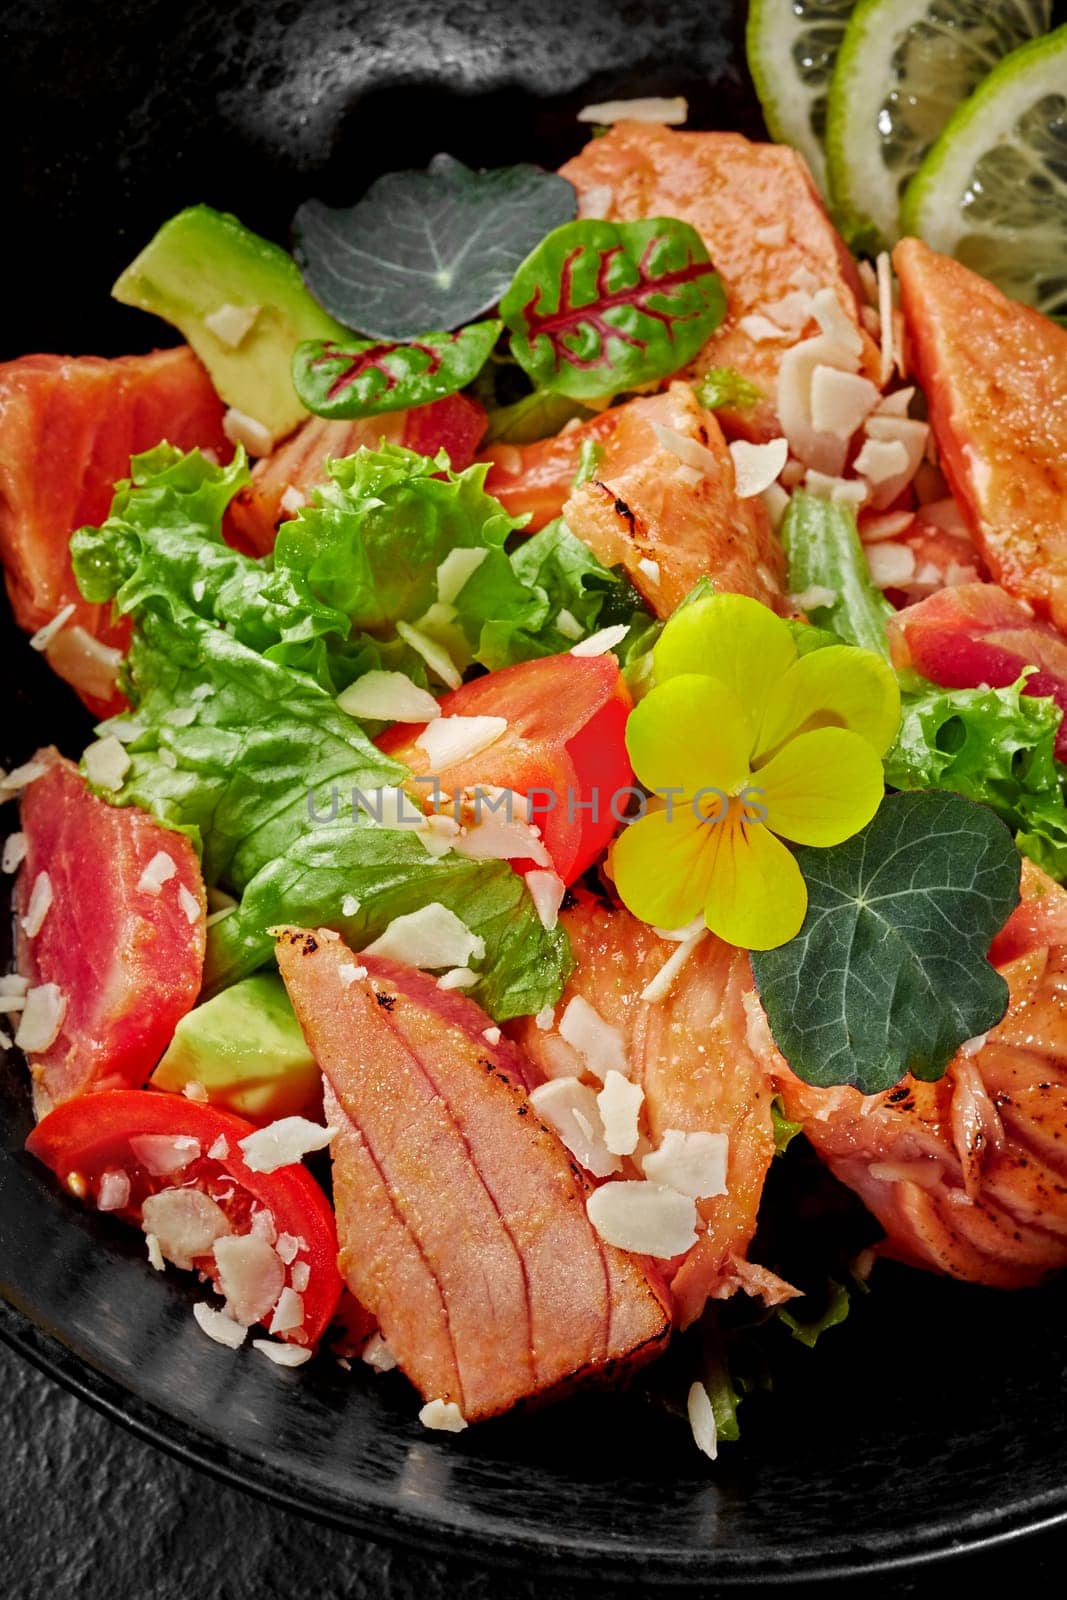 Seared ahi tuna salad with fresh green lettuce, ripe tomatoes, avocado slices and sweet and savory Asian-style dressing of lime, soy sauce, sriracha, garlic and olive oil garnished with yellow pansy